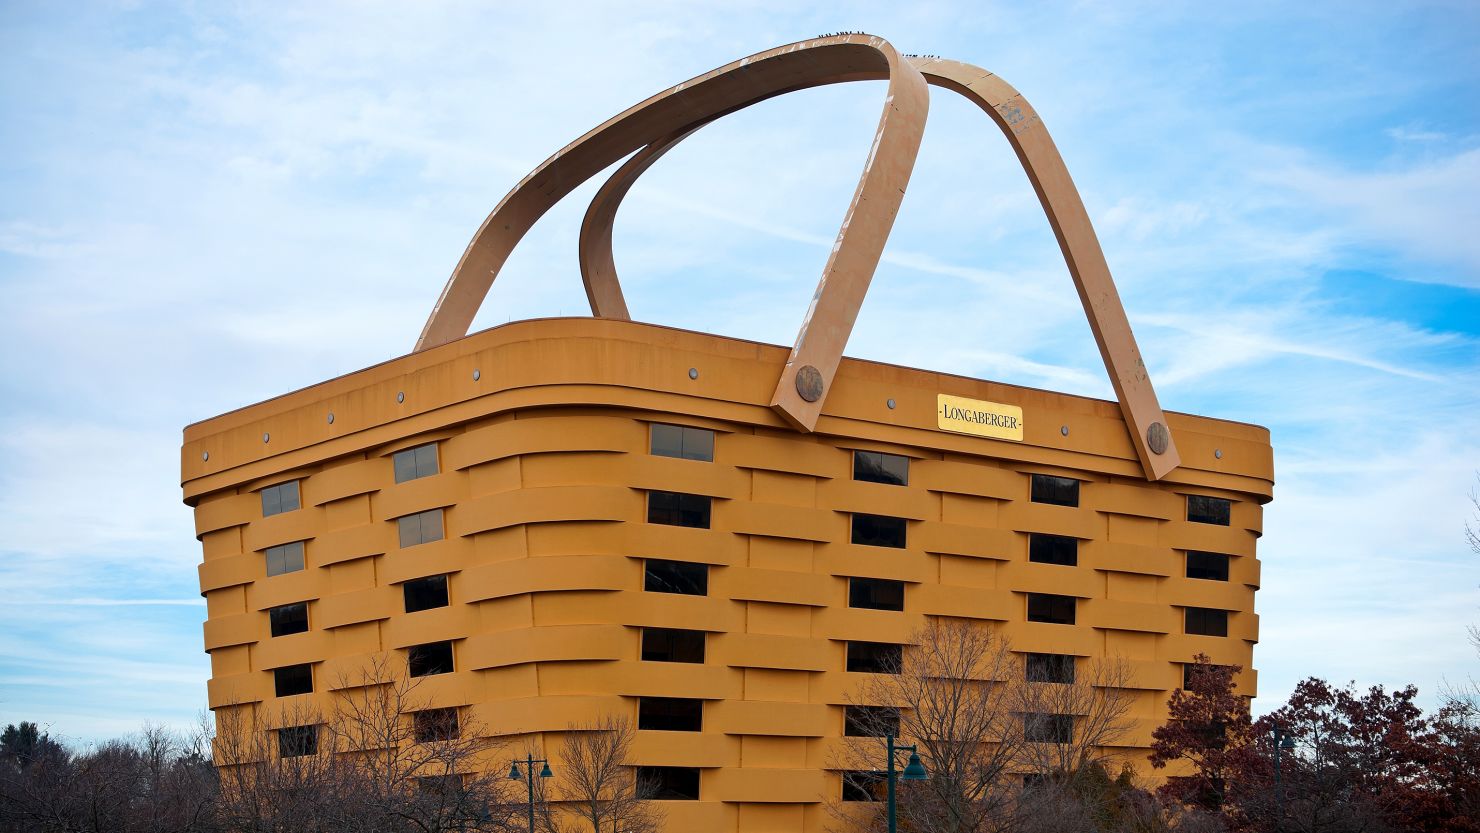 Longaberger Basket Company building will become a luxury hote. 